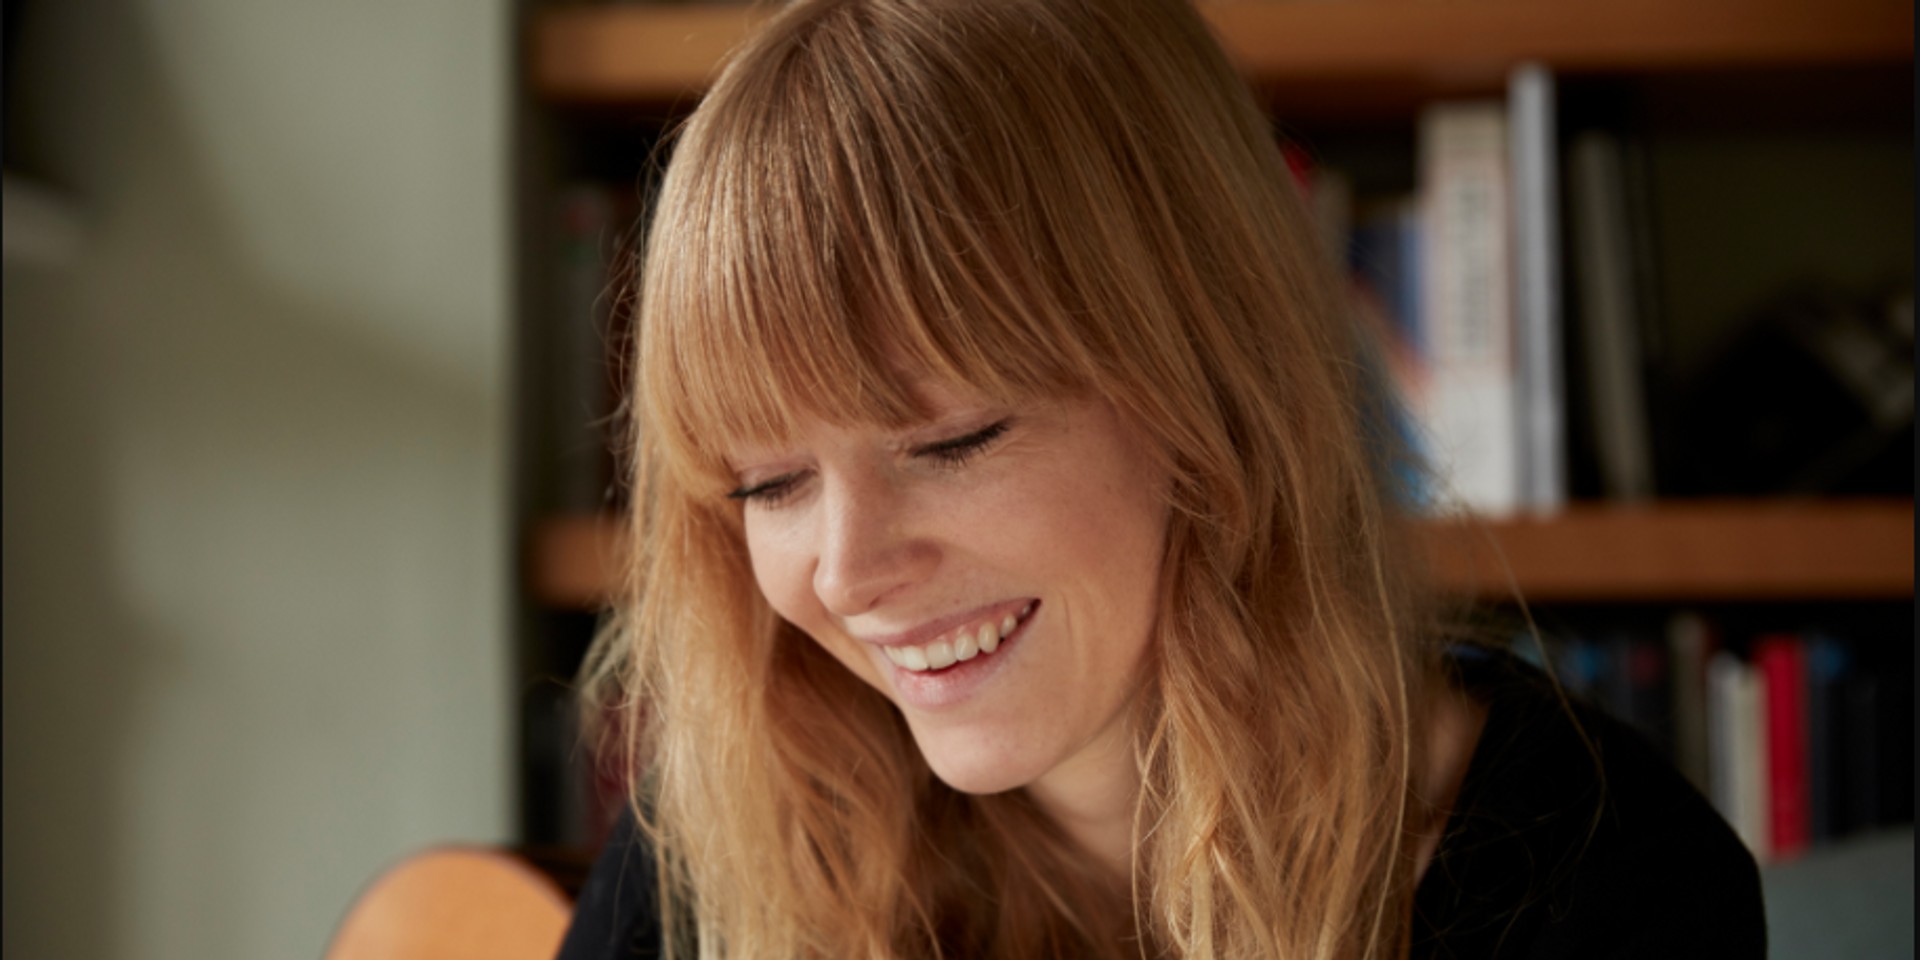 Lucy Rose releases new single, "Is This Called Home" off her forthcoming album, "Something's Changing" - listen